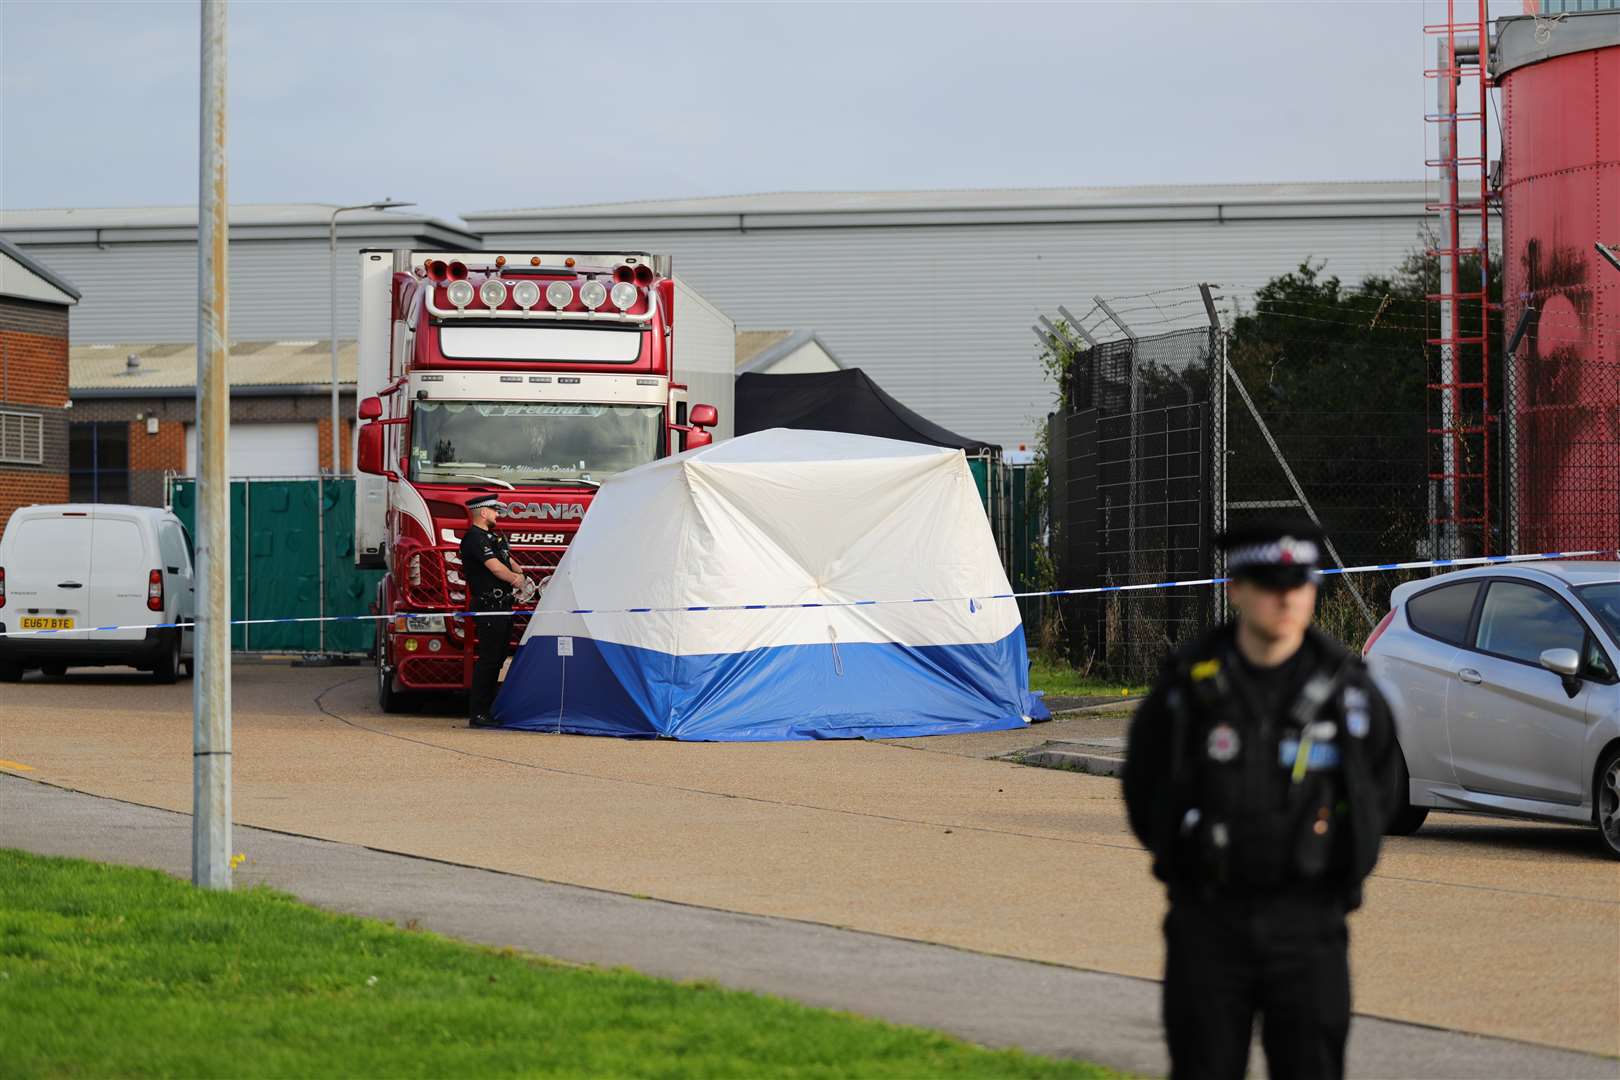 Police activity at the Waterglade Industrial Park in Grays, Essex, in 2019 after 39 bodies were found inside a lorry container (Aaron Chown/PA)